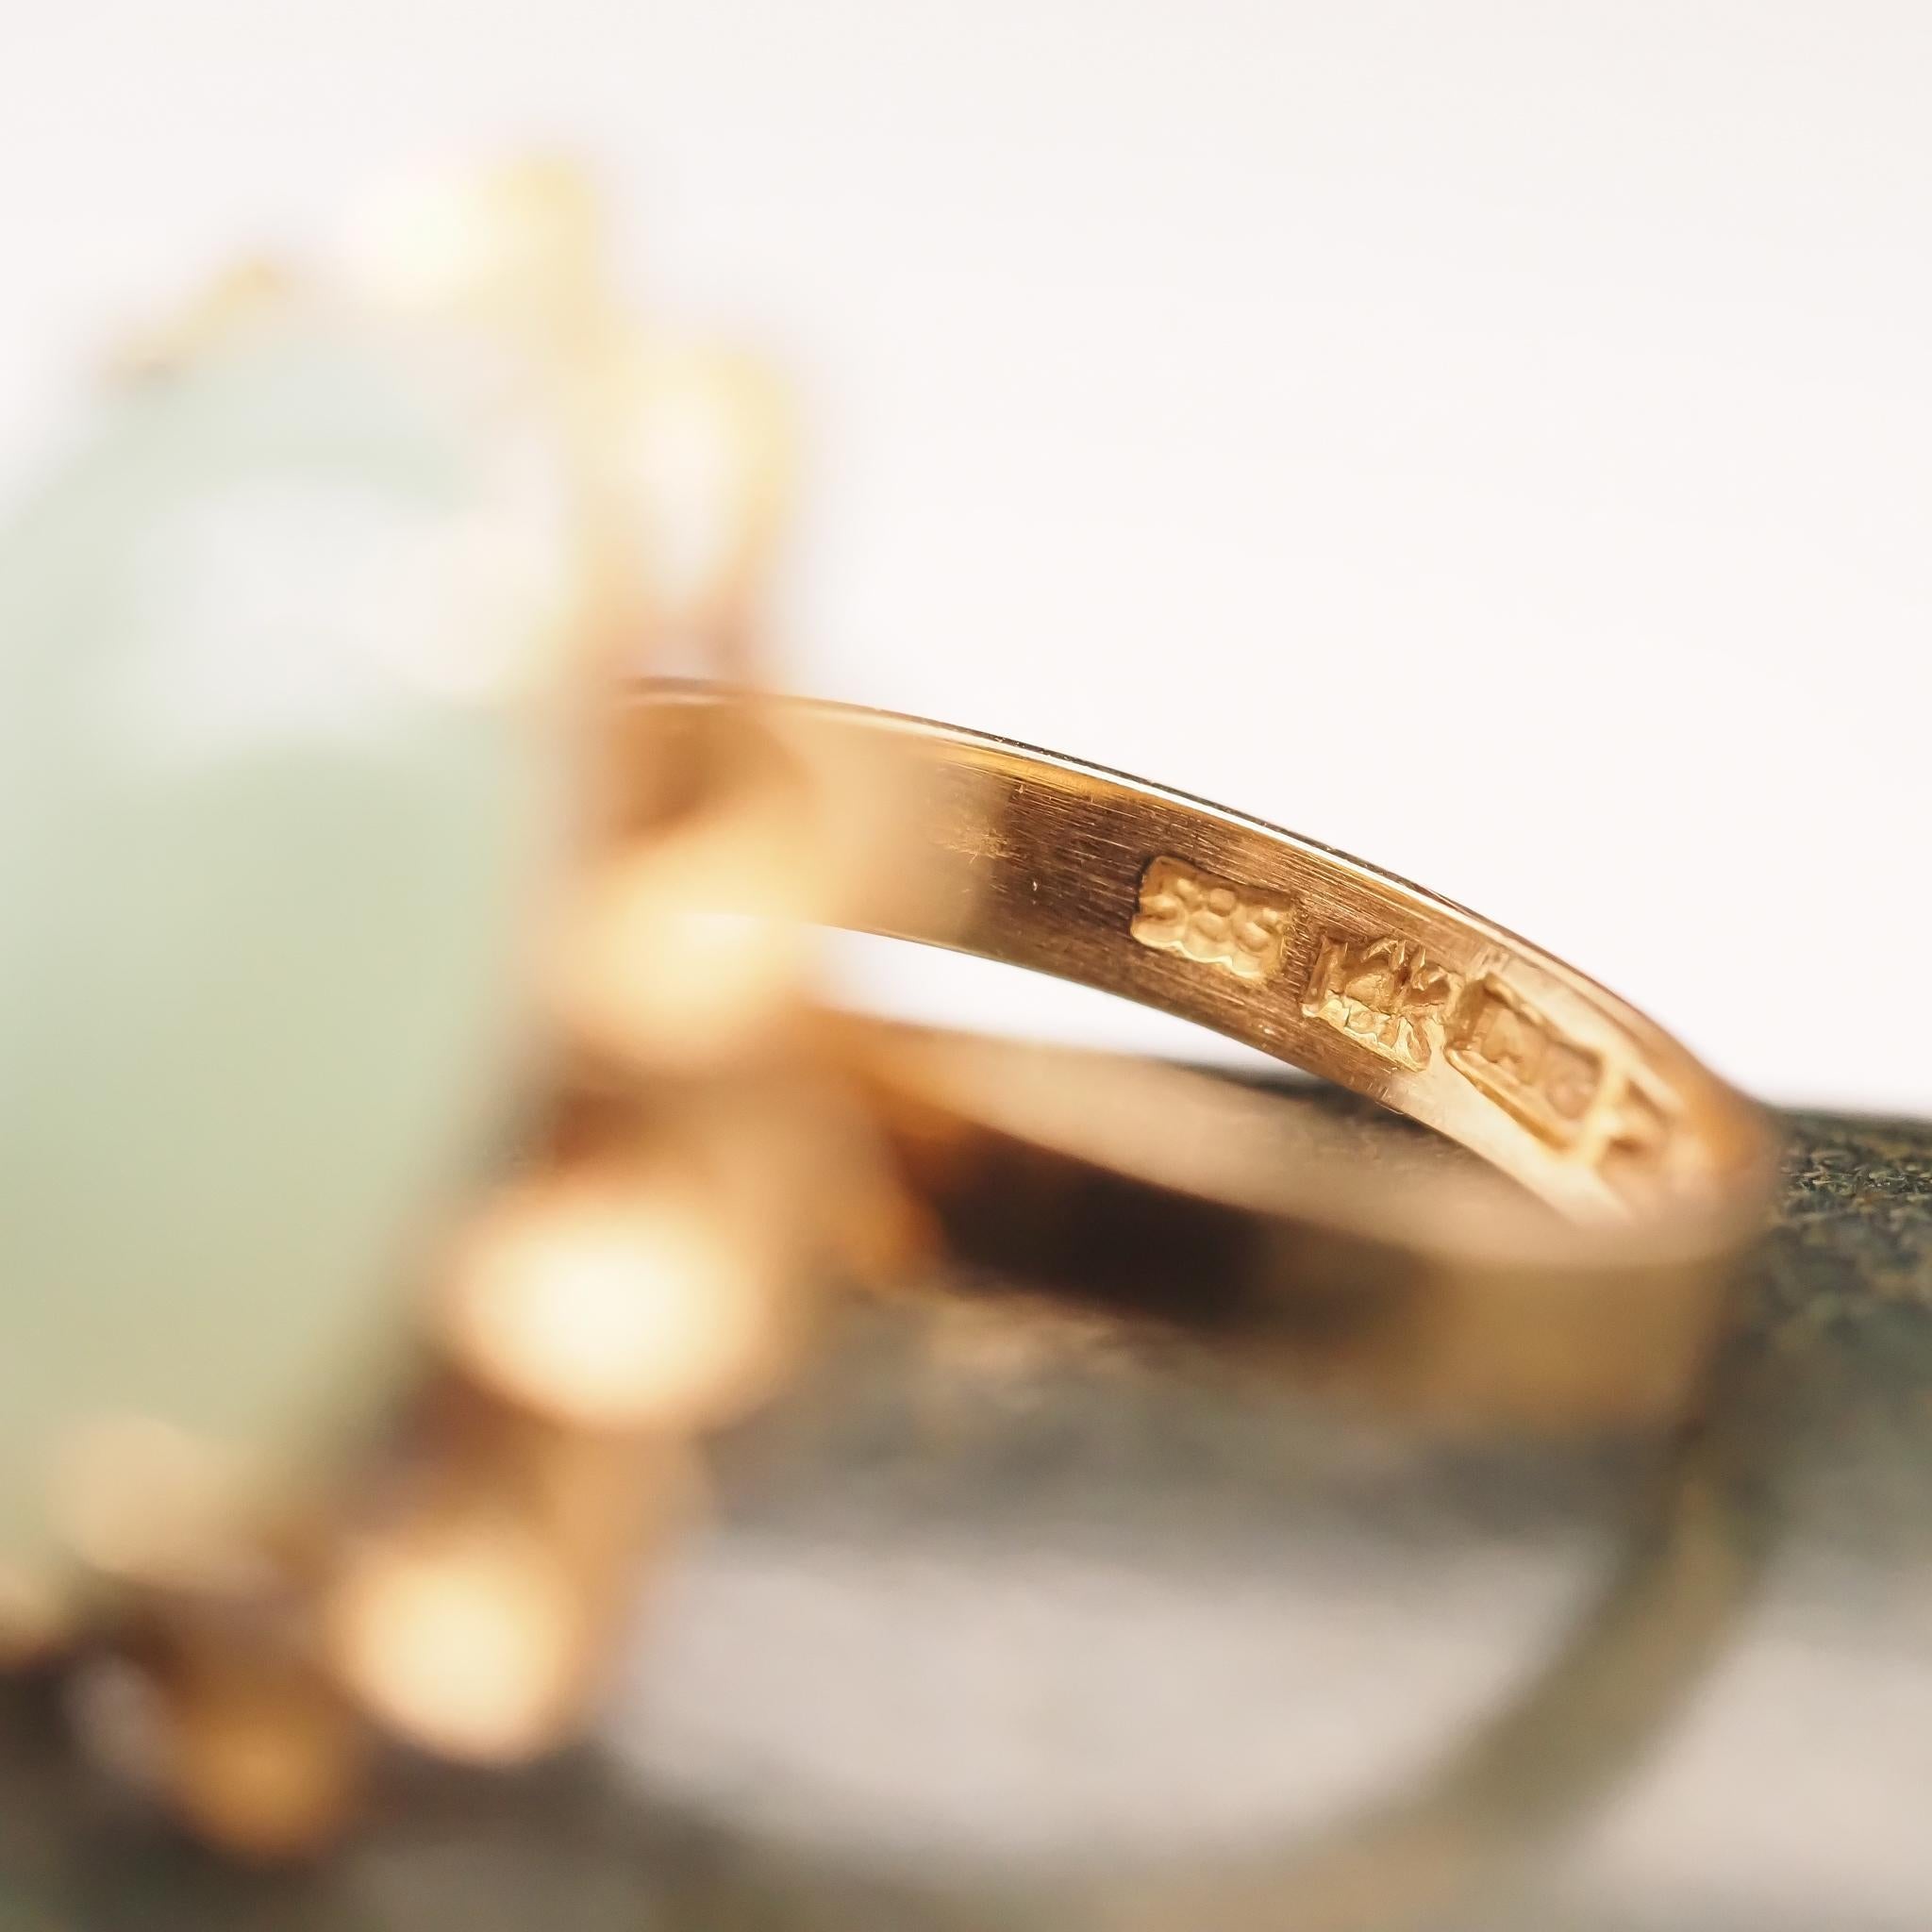 Year: 1970s
Item Details:
Ring Size: 7 (Sizable)
Metal Type: 14K Yellow Gold [Hallmarked, and Tested]
Weight: 7.7 grams
Jade Details: 18.1mm x 13.1mm
Band Width: 3.5mm
Condition: Excellent